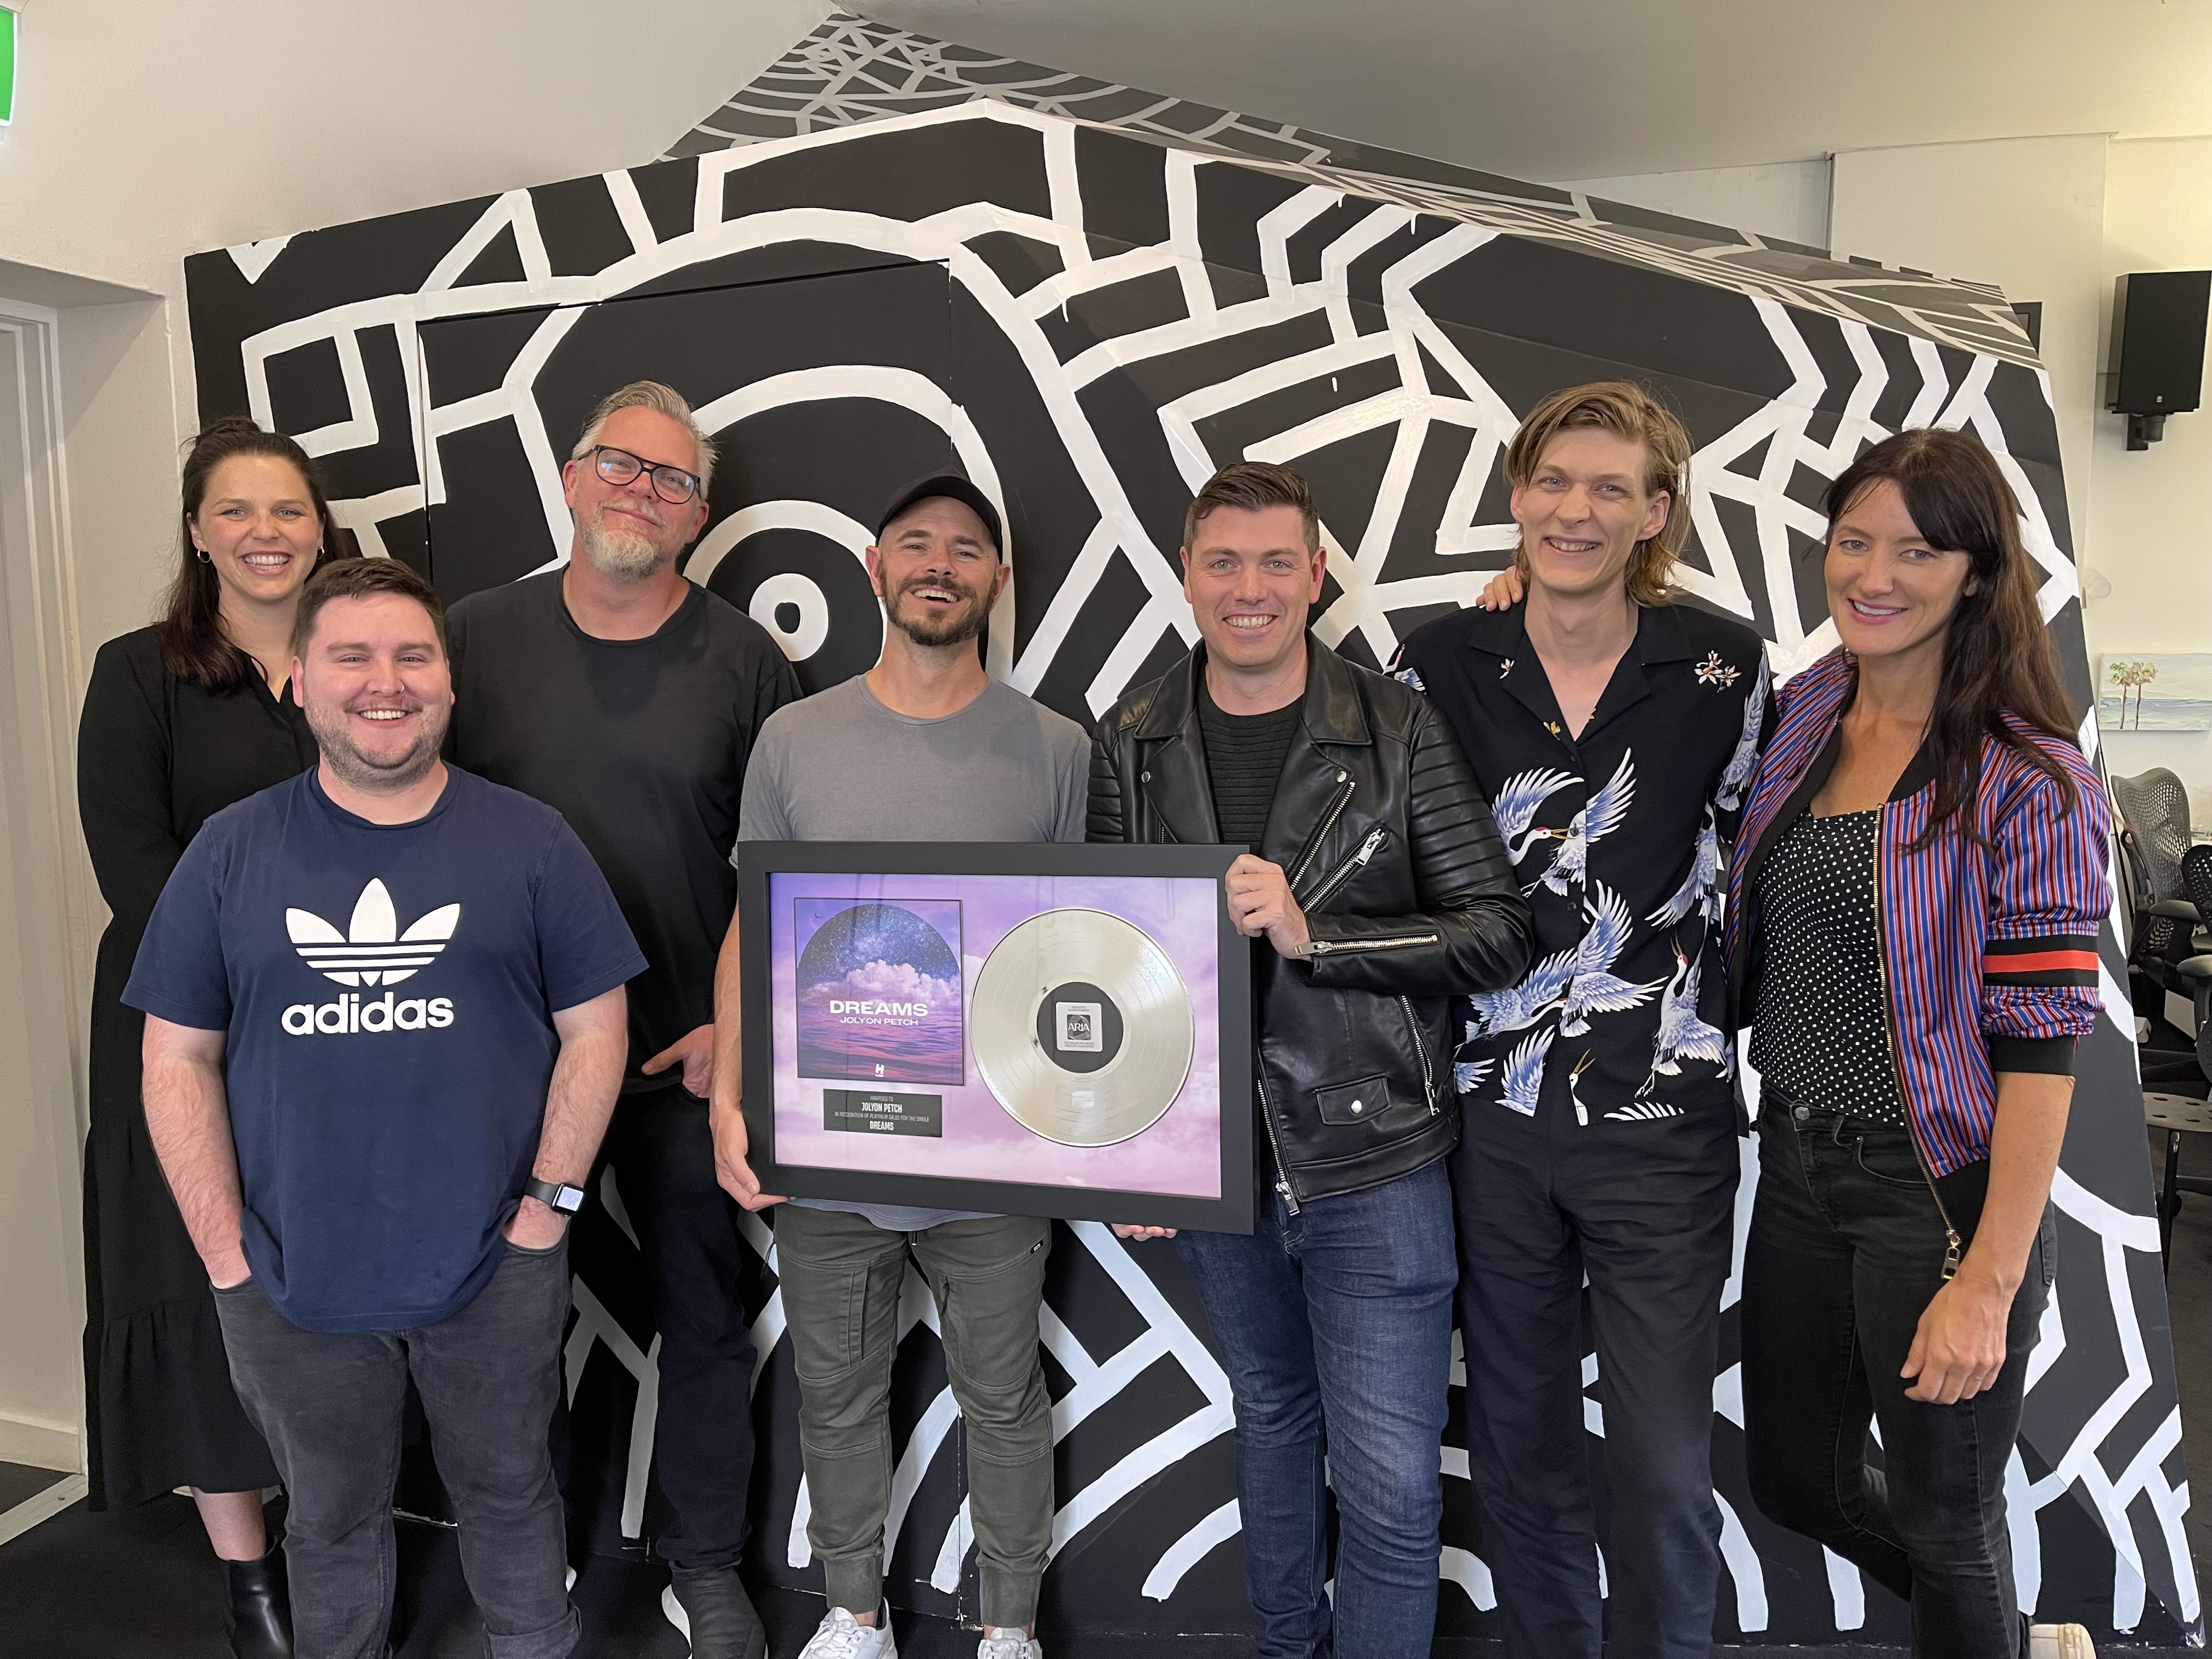 Jolyon Petch’s ‘Dreams’ clocks up another milestone by going Platinum